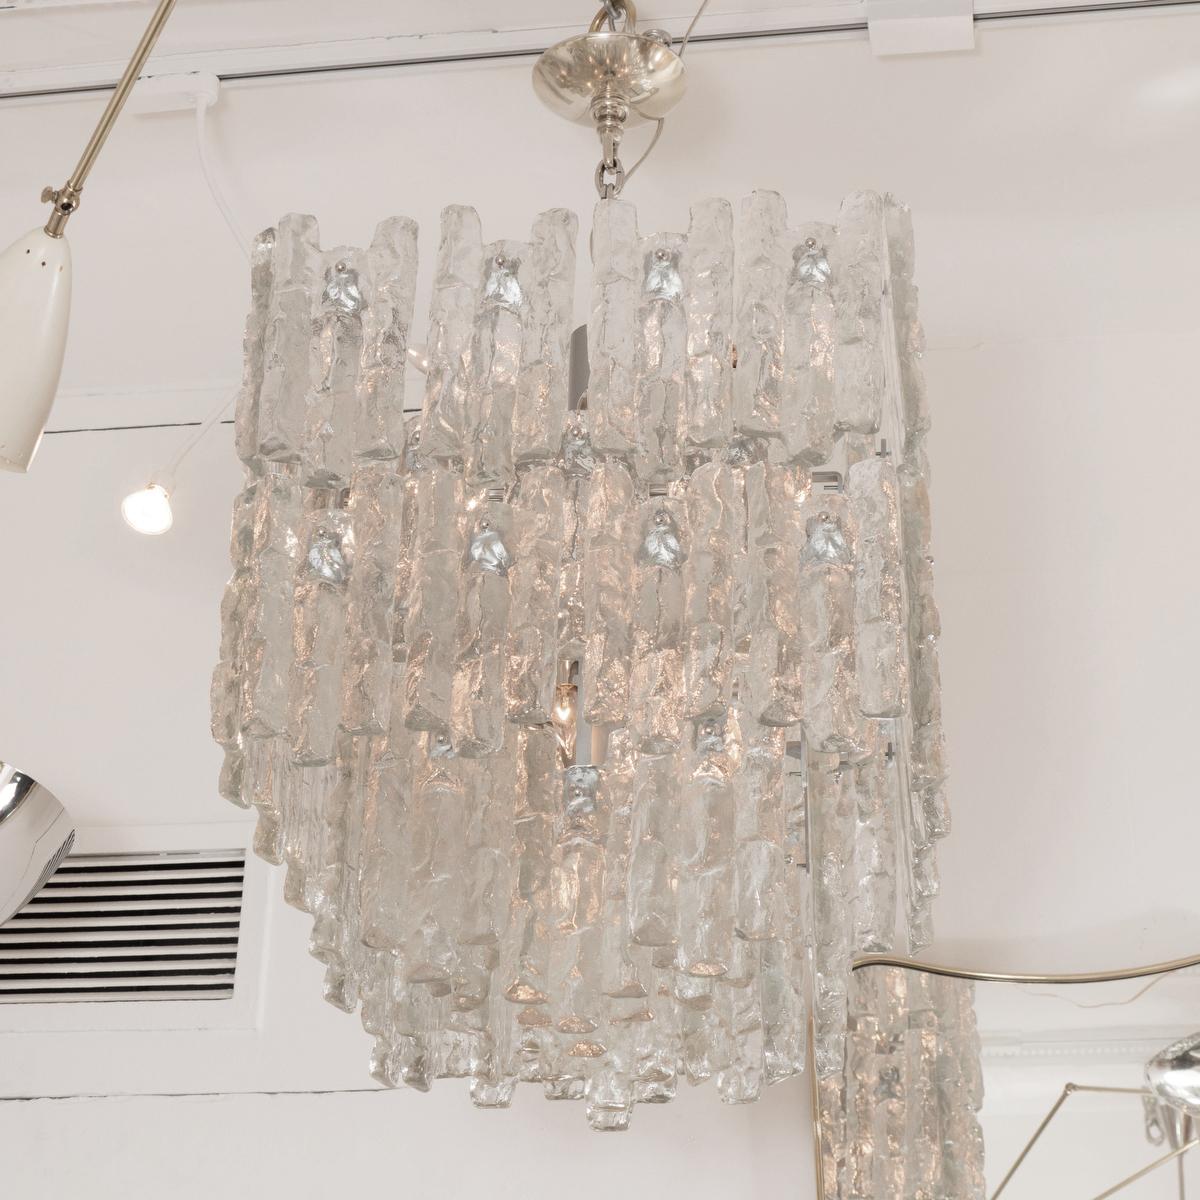 Mid-Century Modern Square Two-Tier Chandelier Composed of Ice Inspired Glass Elements